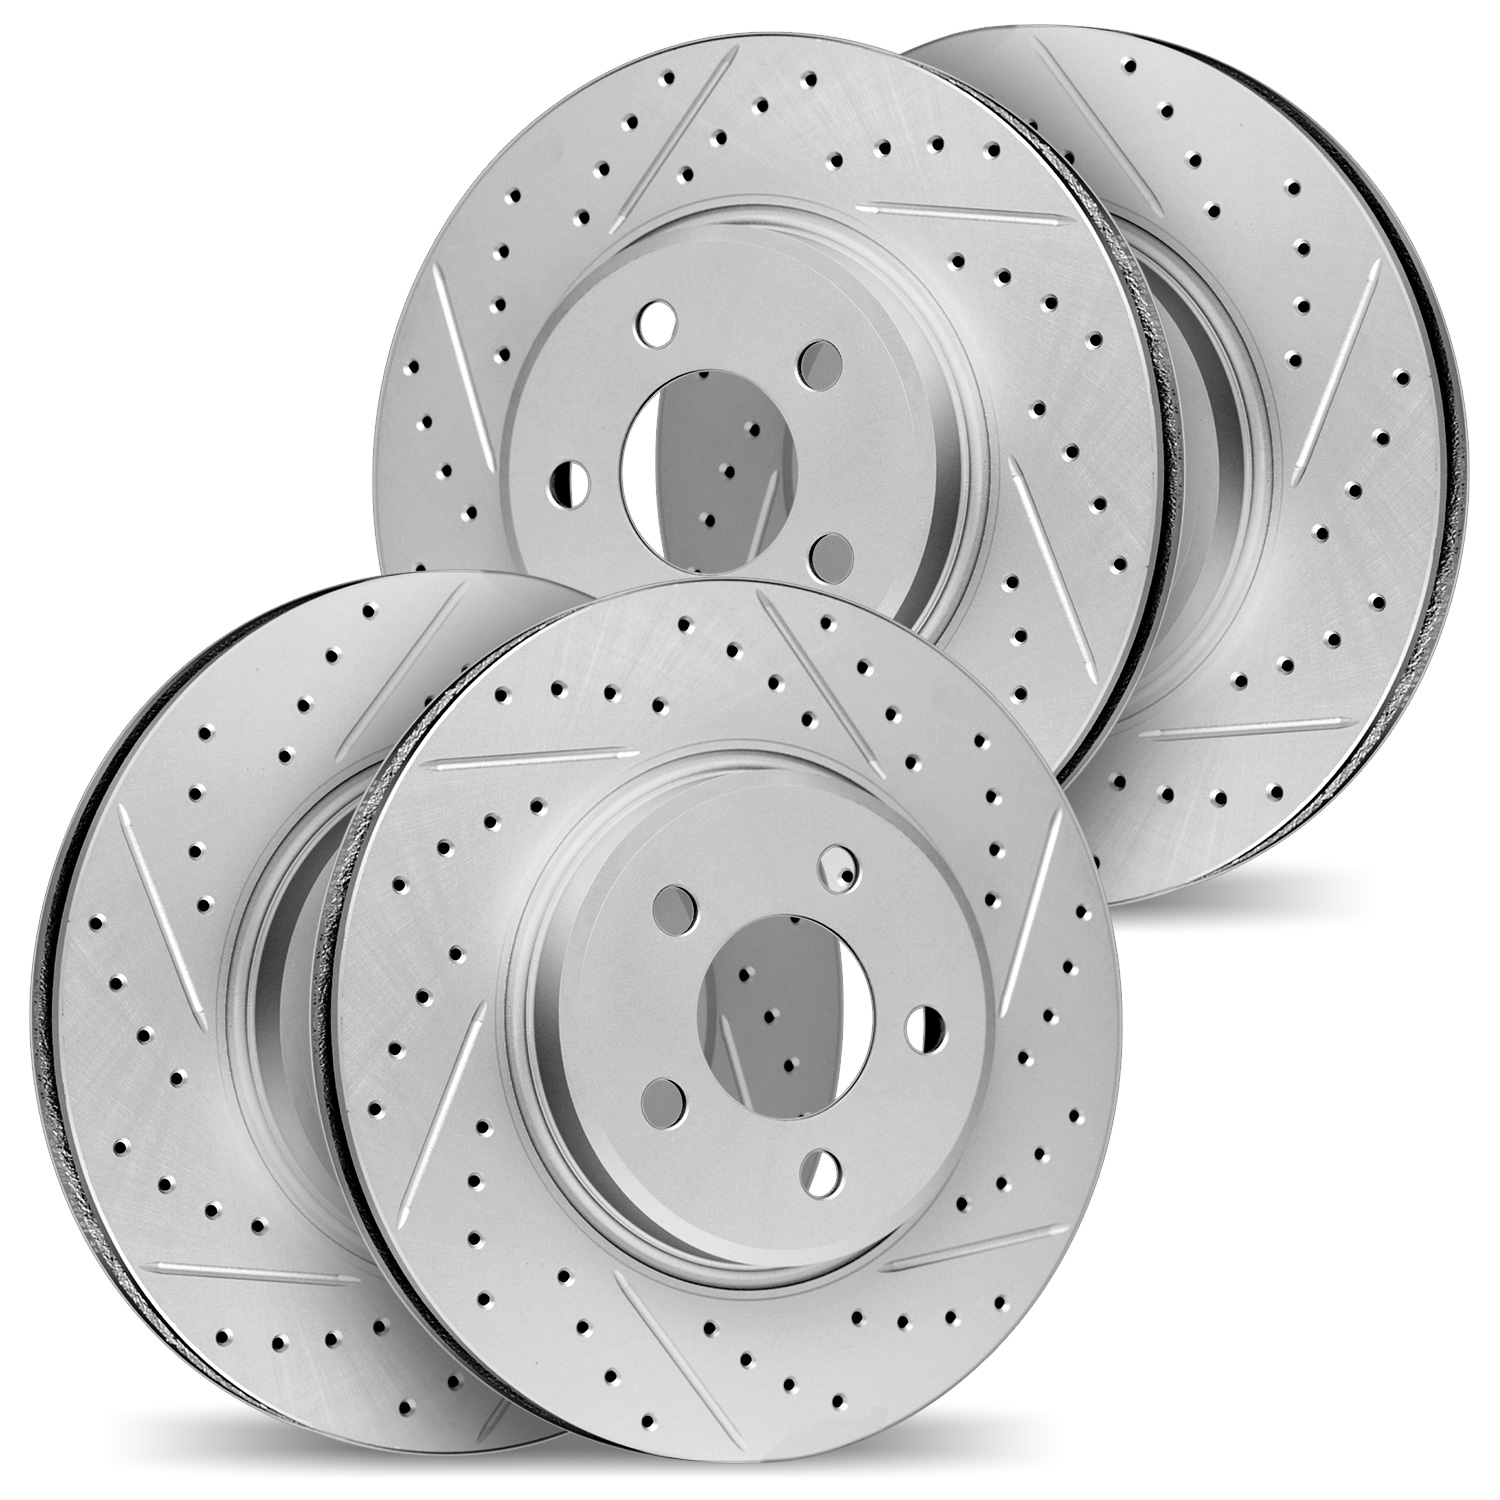 2004-31060 Geoperformance Drilled/Slotted Brake Rotors, 2011-2018 BMW, Position: Front and Rear